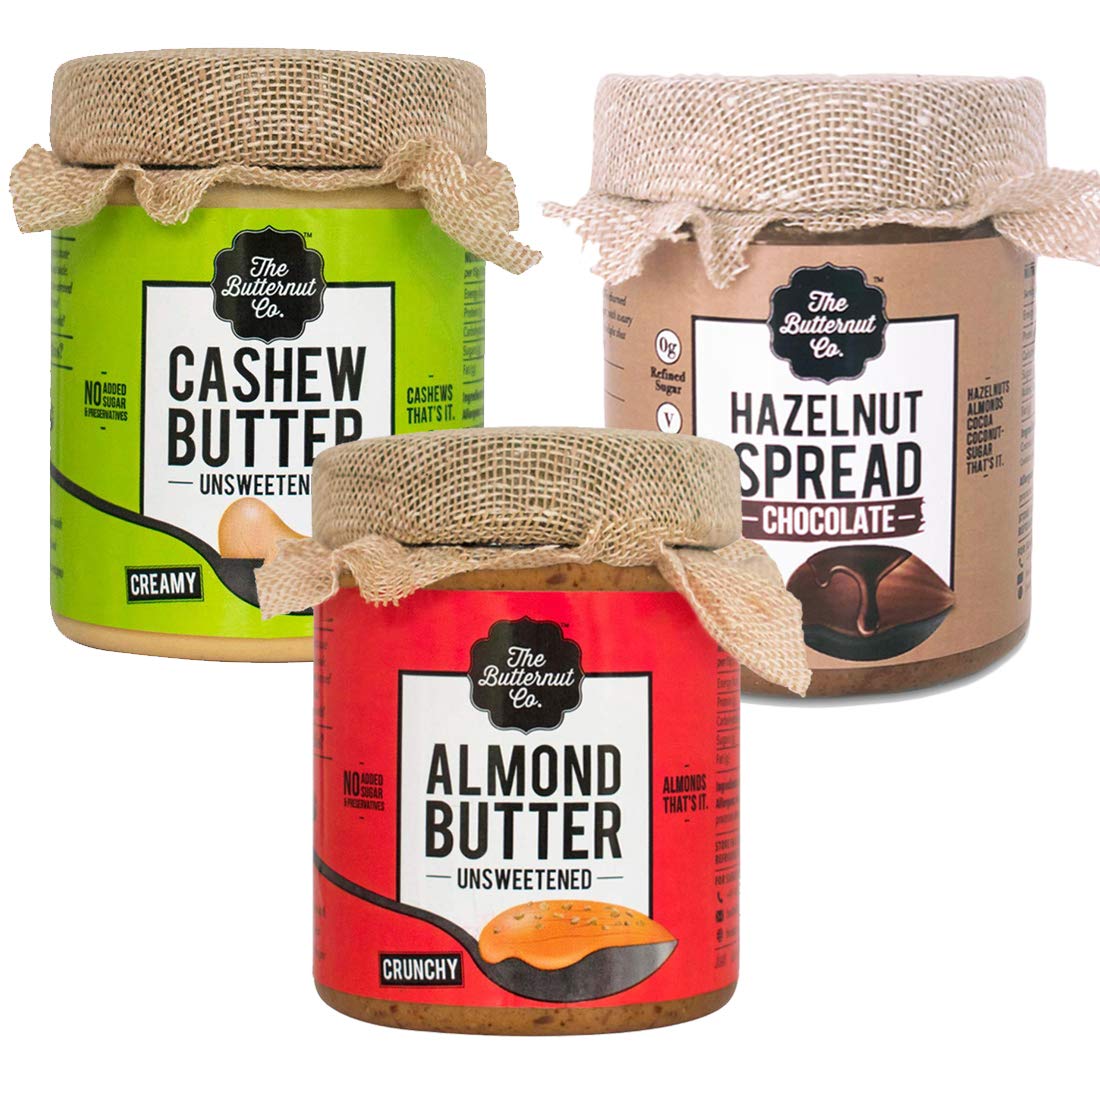 The Butternut Co. Cashew Butter Unsweetened, Almond Butter Unsweetened Crunchy & Chocolate Hazelnut Spread Creamy, 200 gm each - Pack of 3 (No Added Sugar, Vegan, High Protein, Keto)